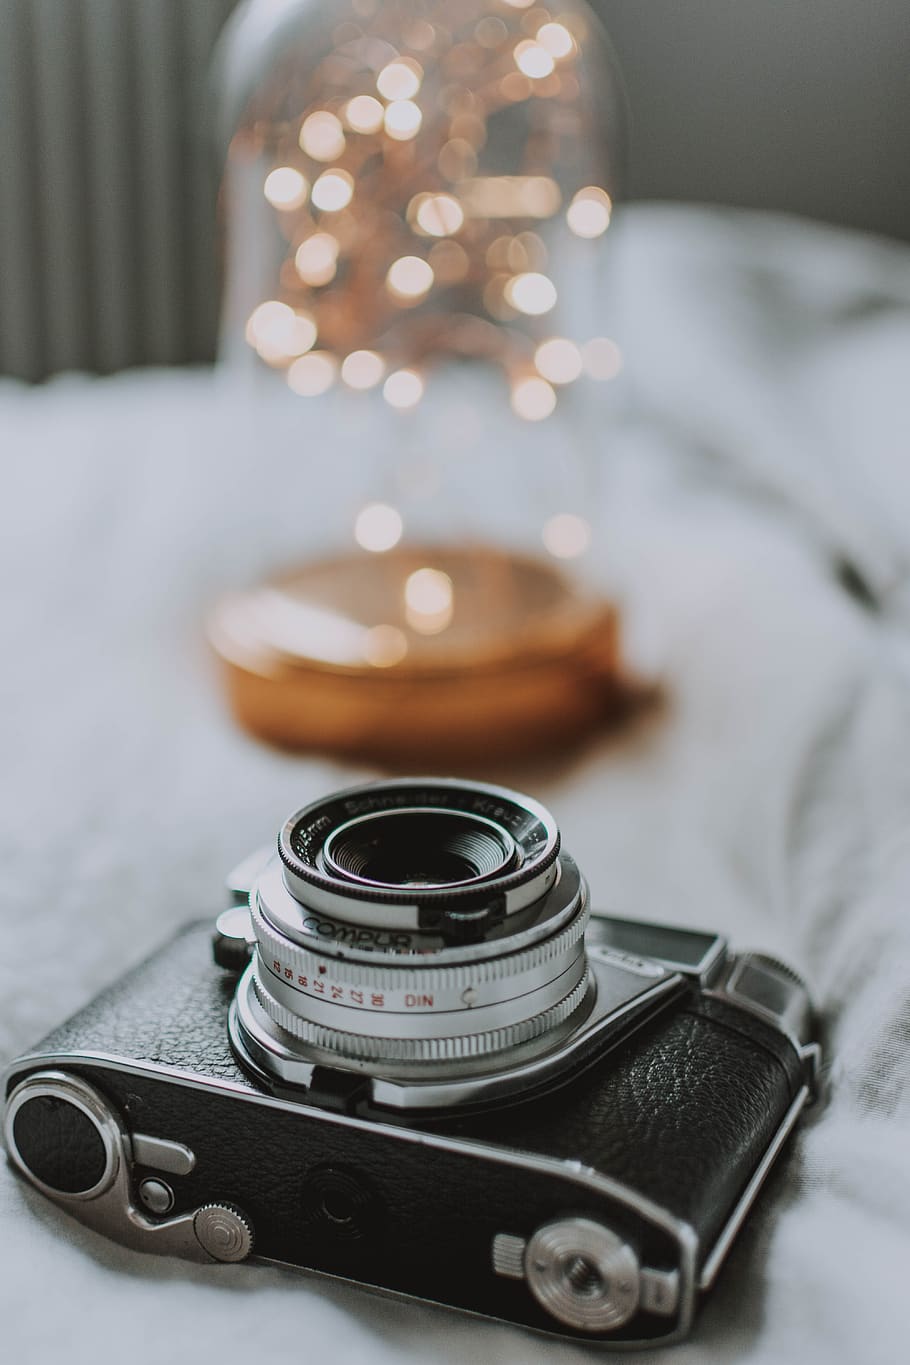 camera, bed, blanket, light, bokeh, light effect, indoors, photography themes, focus on foreground, photographic equipment